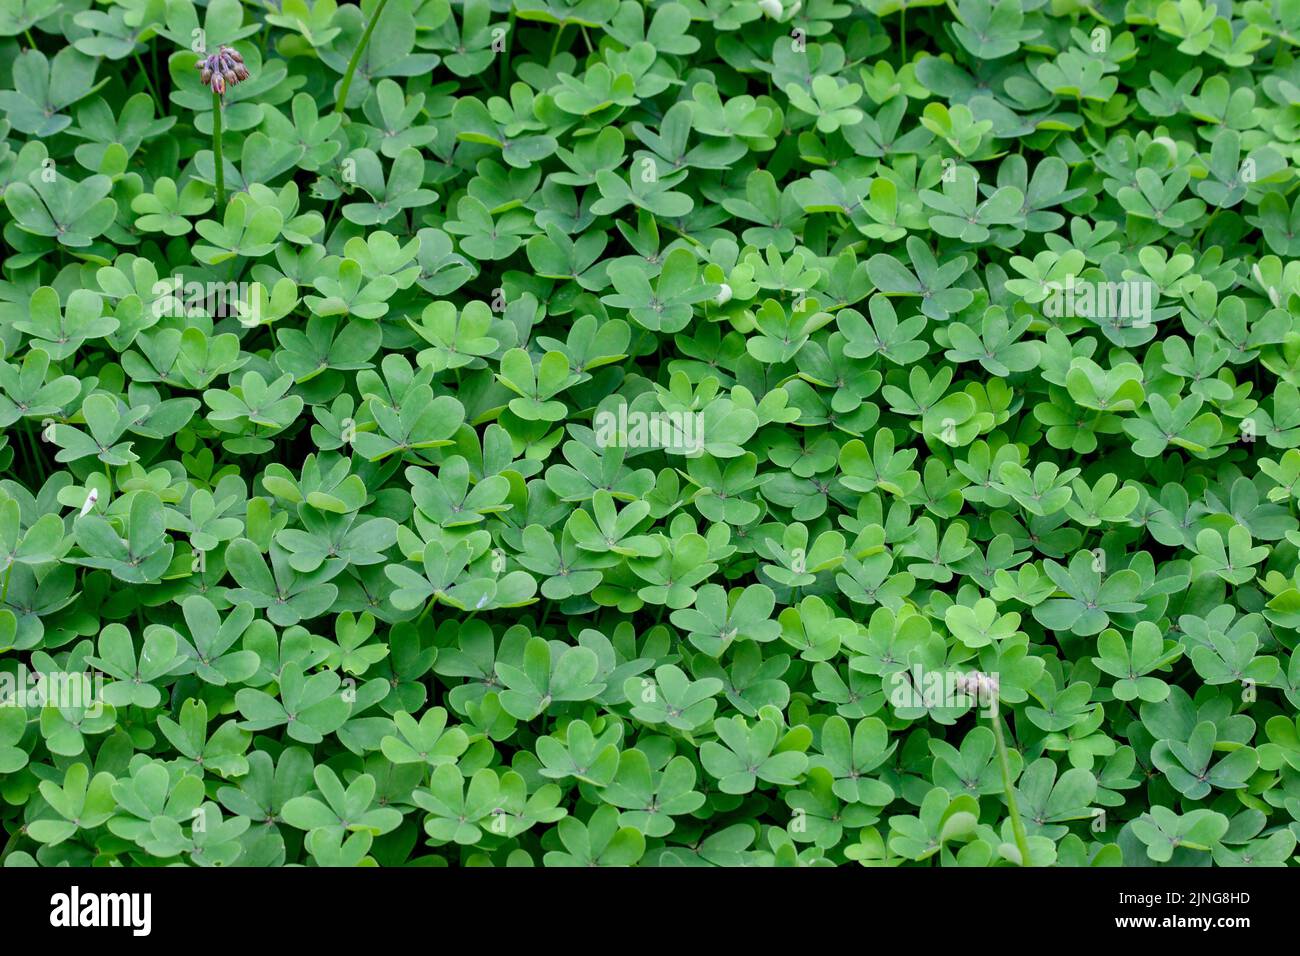 Green clovers texture, Green background with three-leaved shamrocks, background, closeup view with details, top view Stock Photo